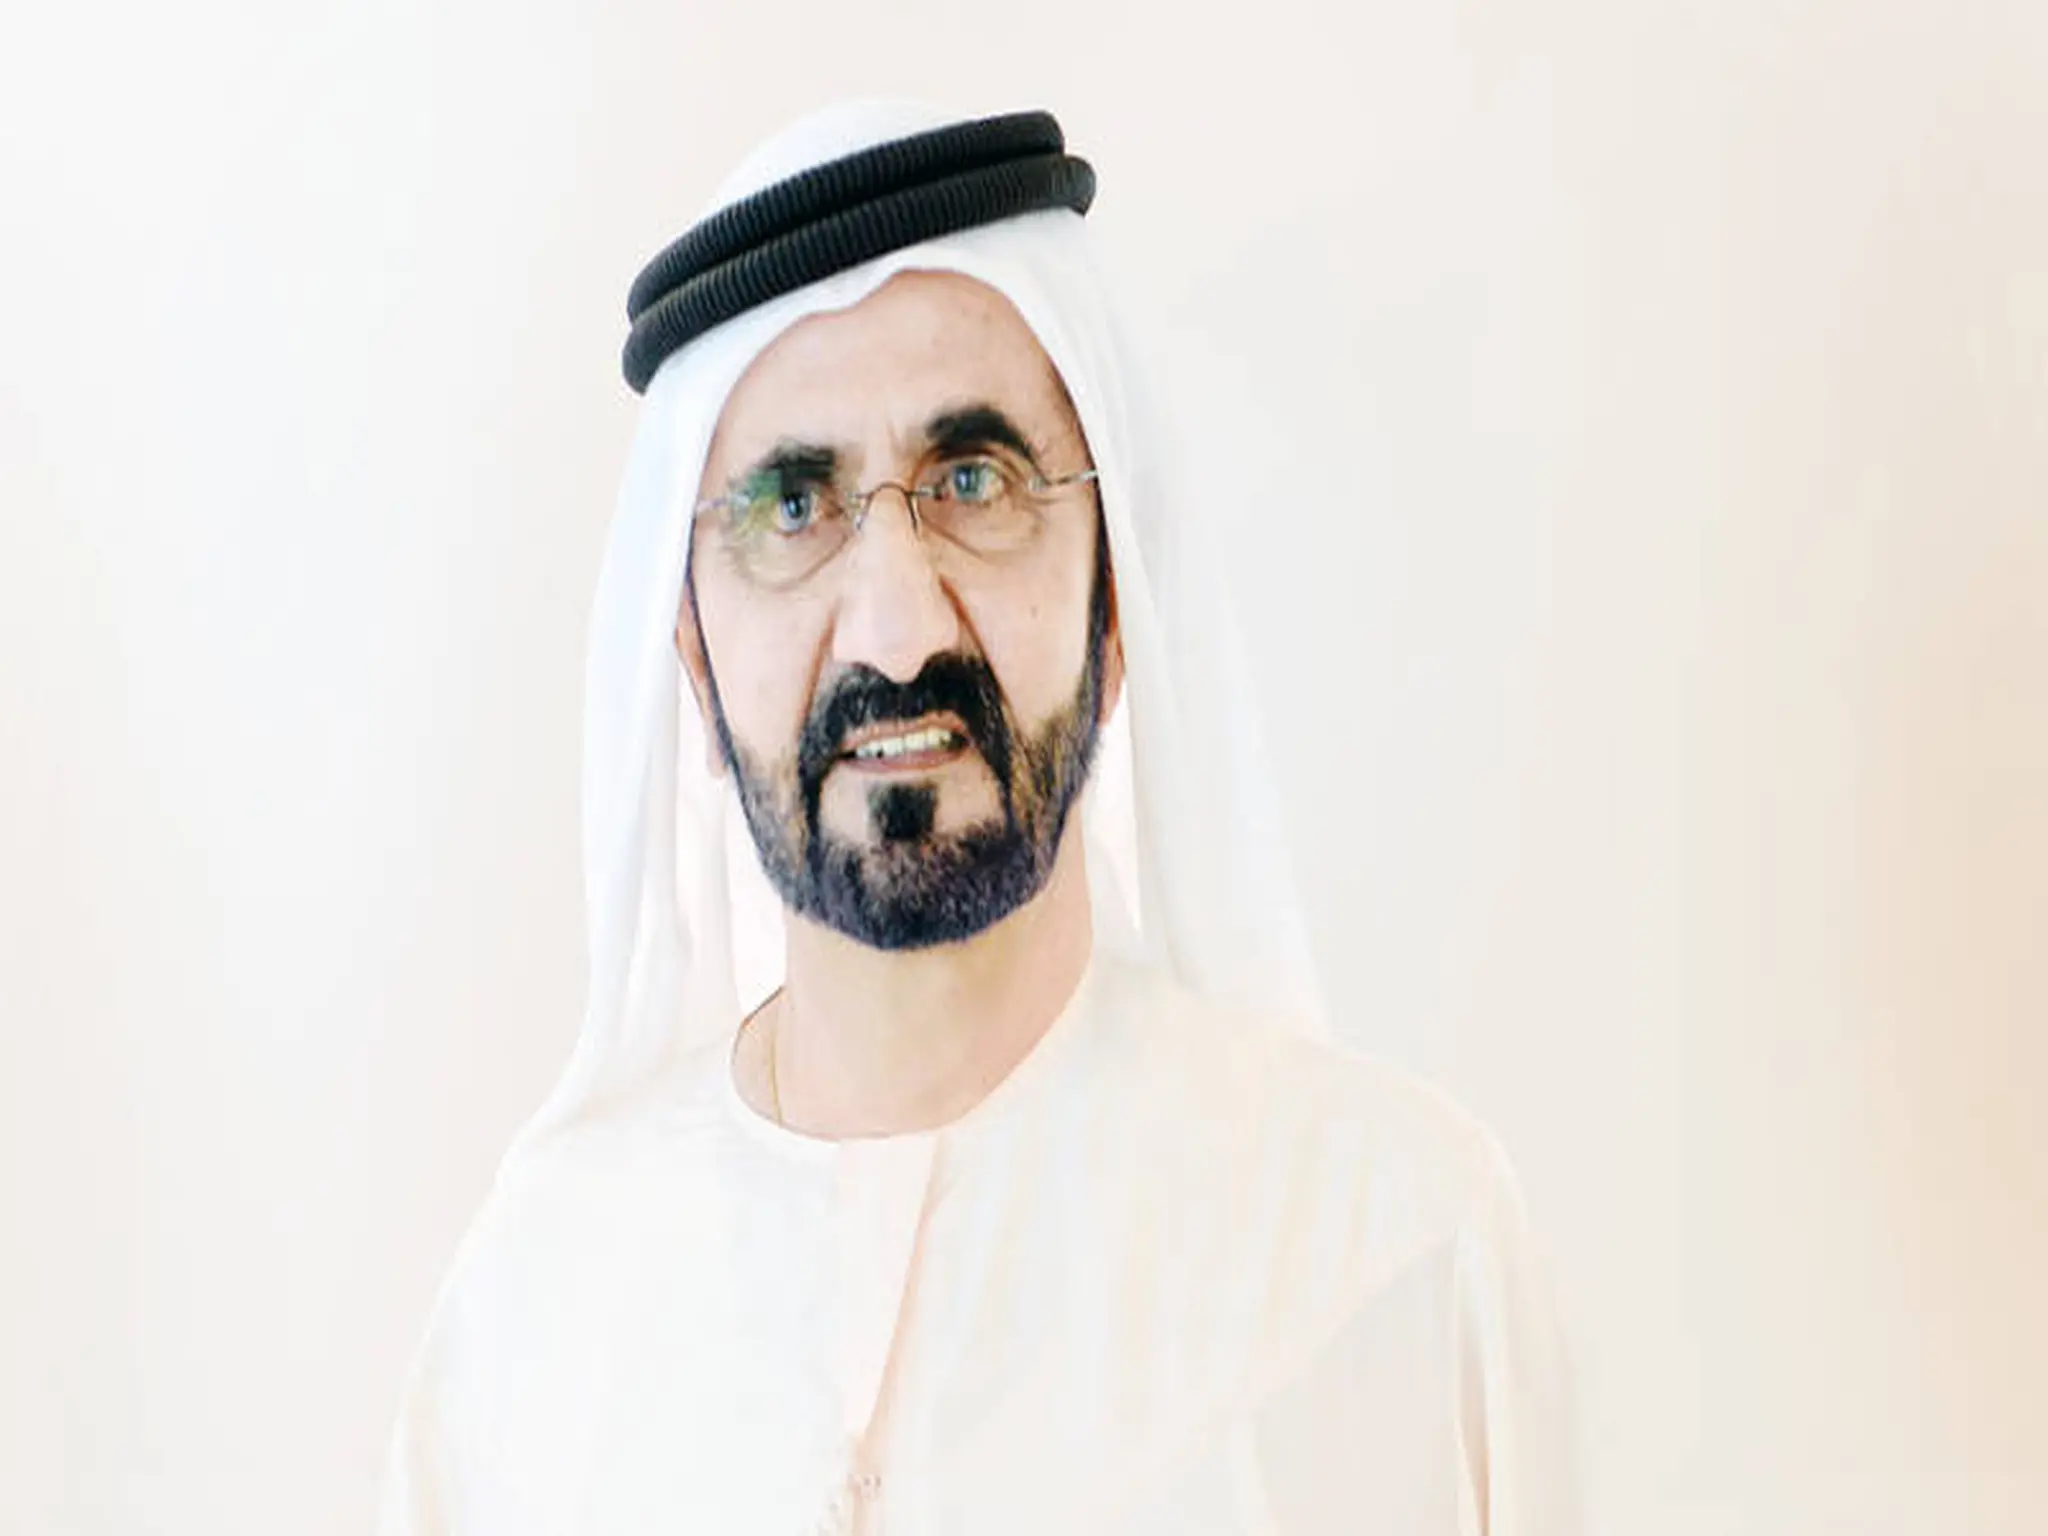 The UAE announces a new decision regarding the fine for non-compliance with Emiratization